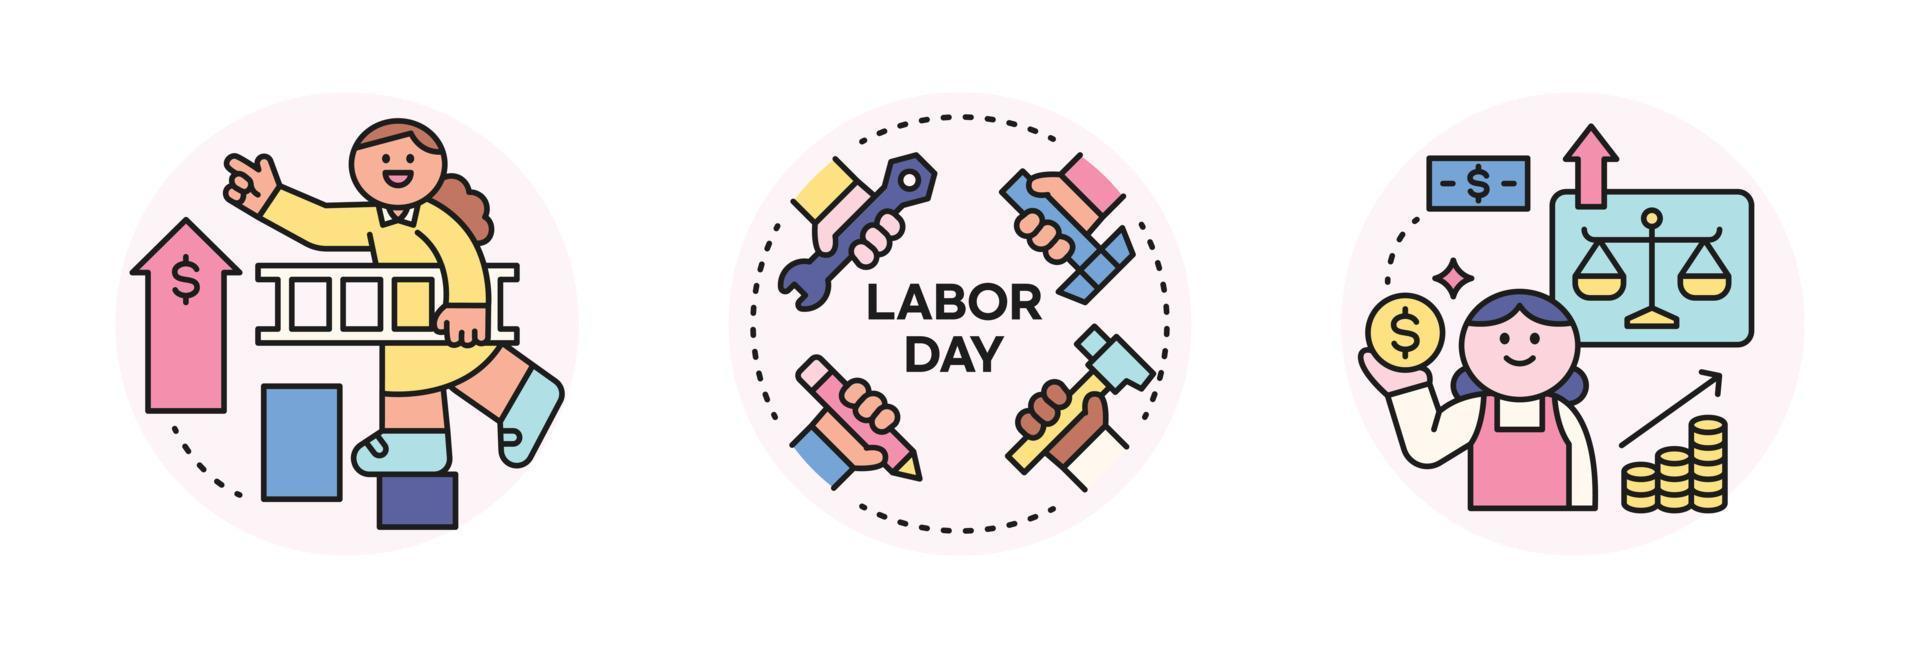 Labor Day. people who are working. Hands holding tools for each field, climbing the ladder for promotion, salary and household. vector